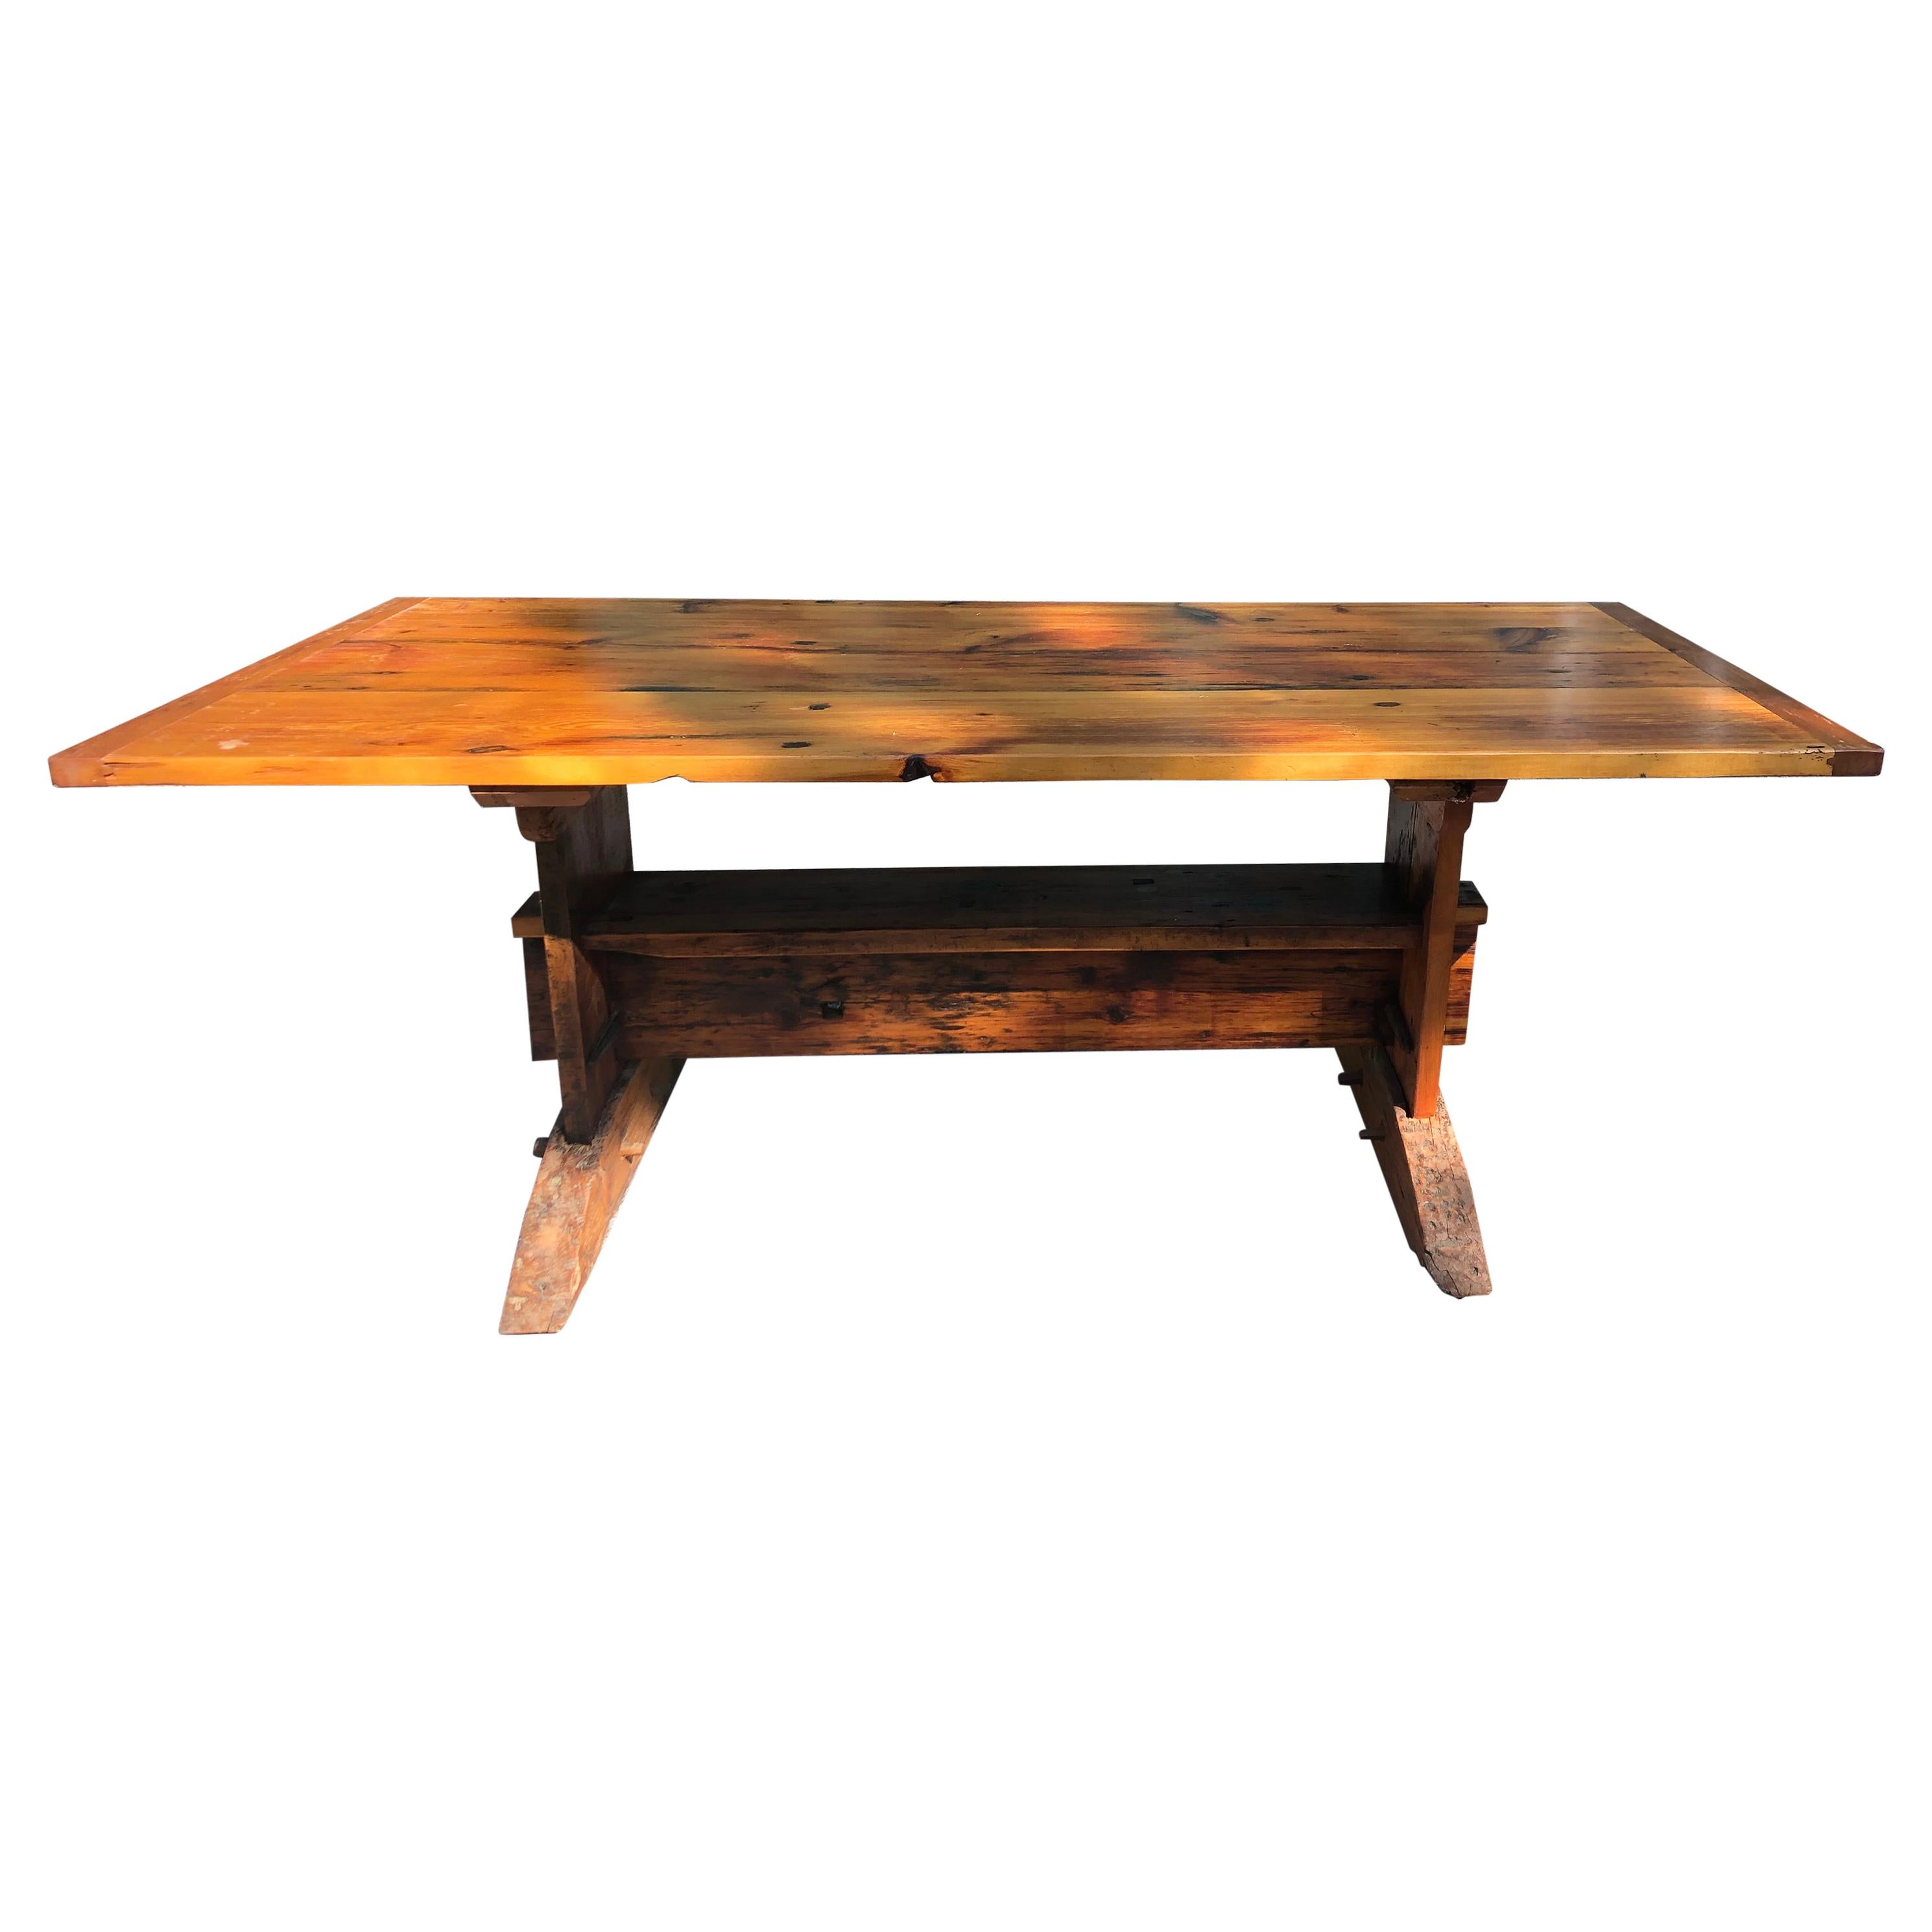 Coffee or Center Table In A Farmhouse Oversized Rustic Style and Made from Rough Hewn Sugar Pine